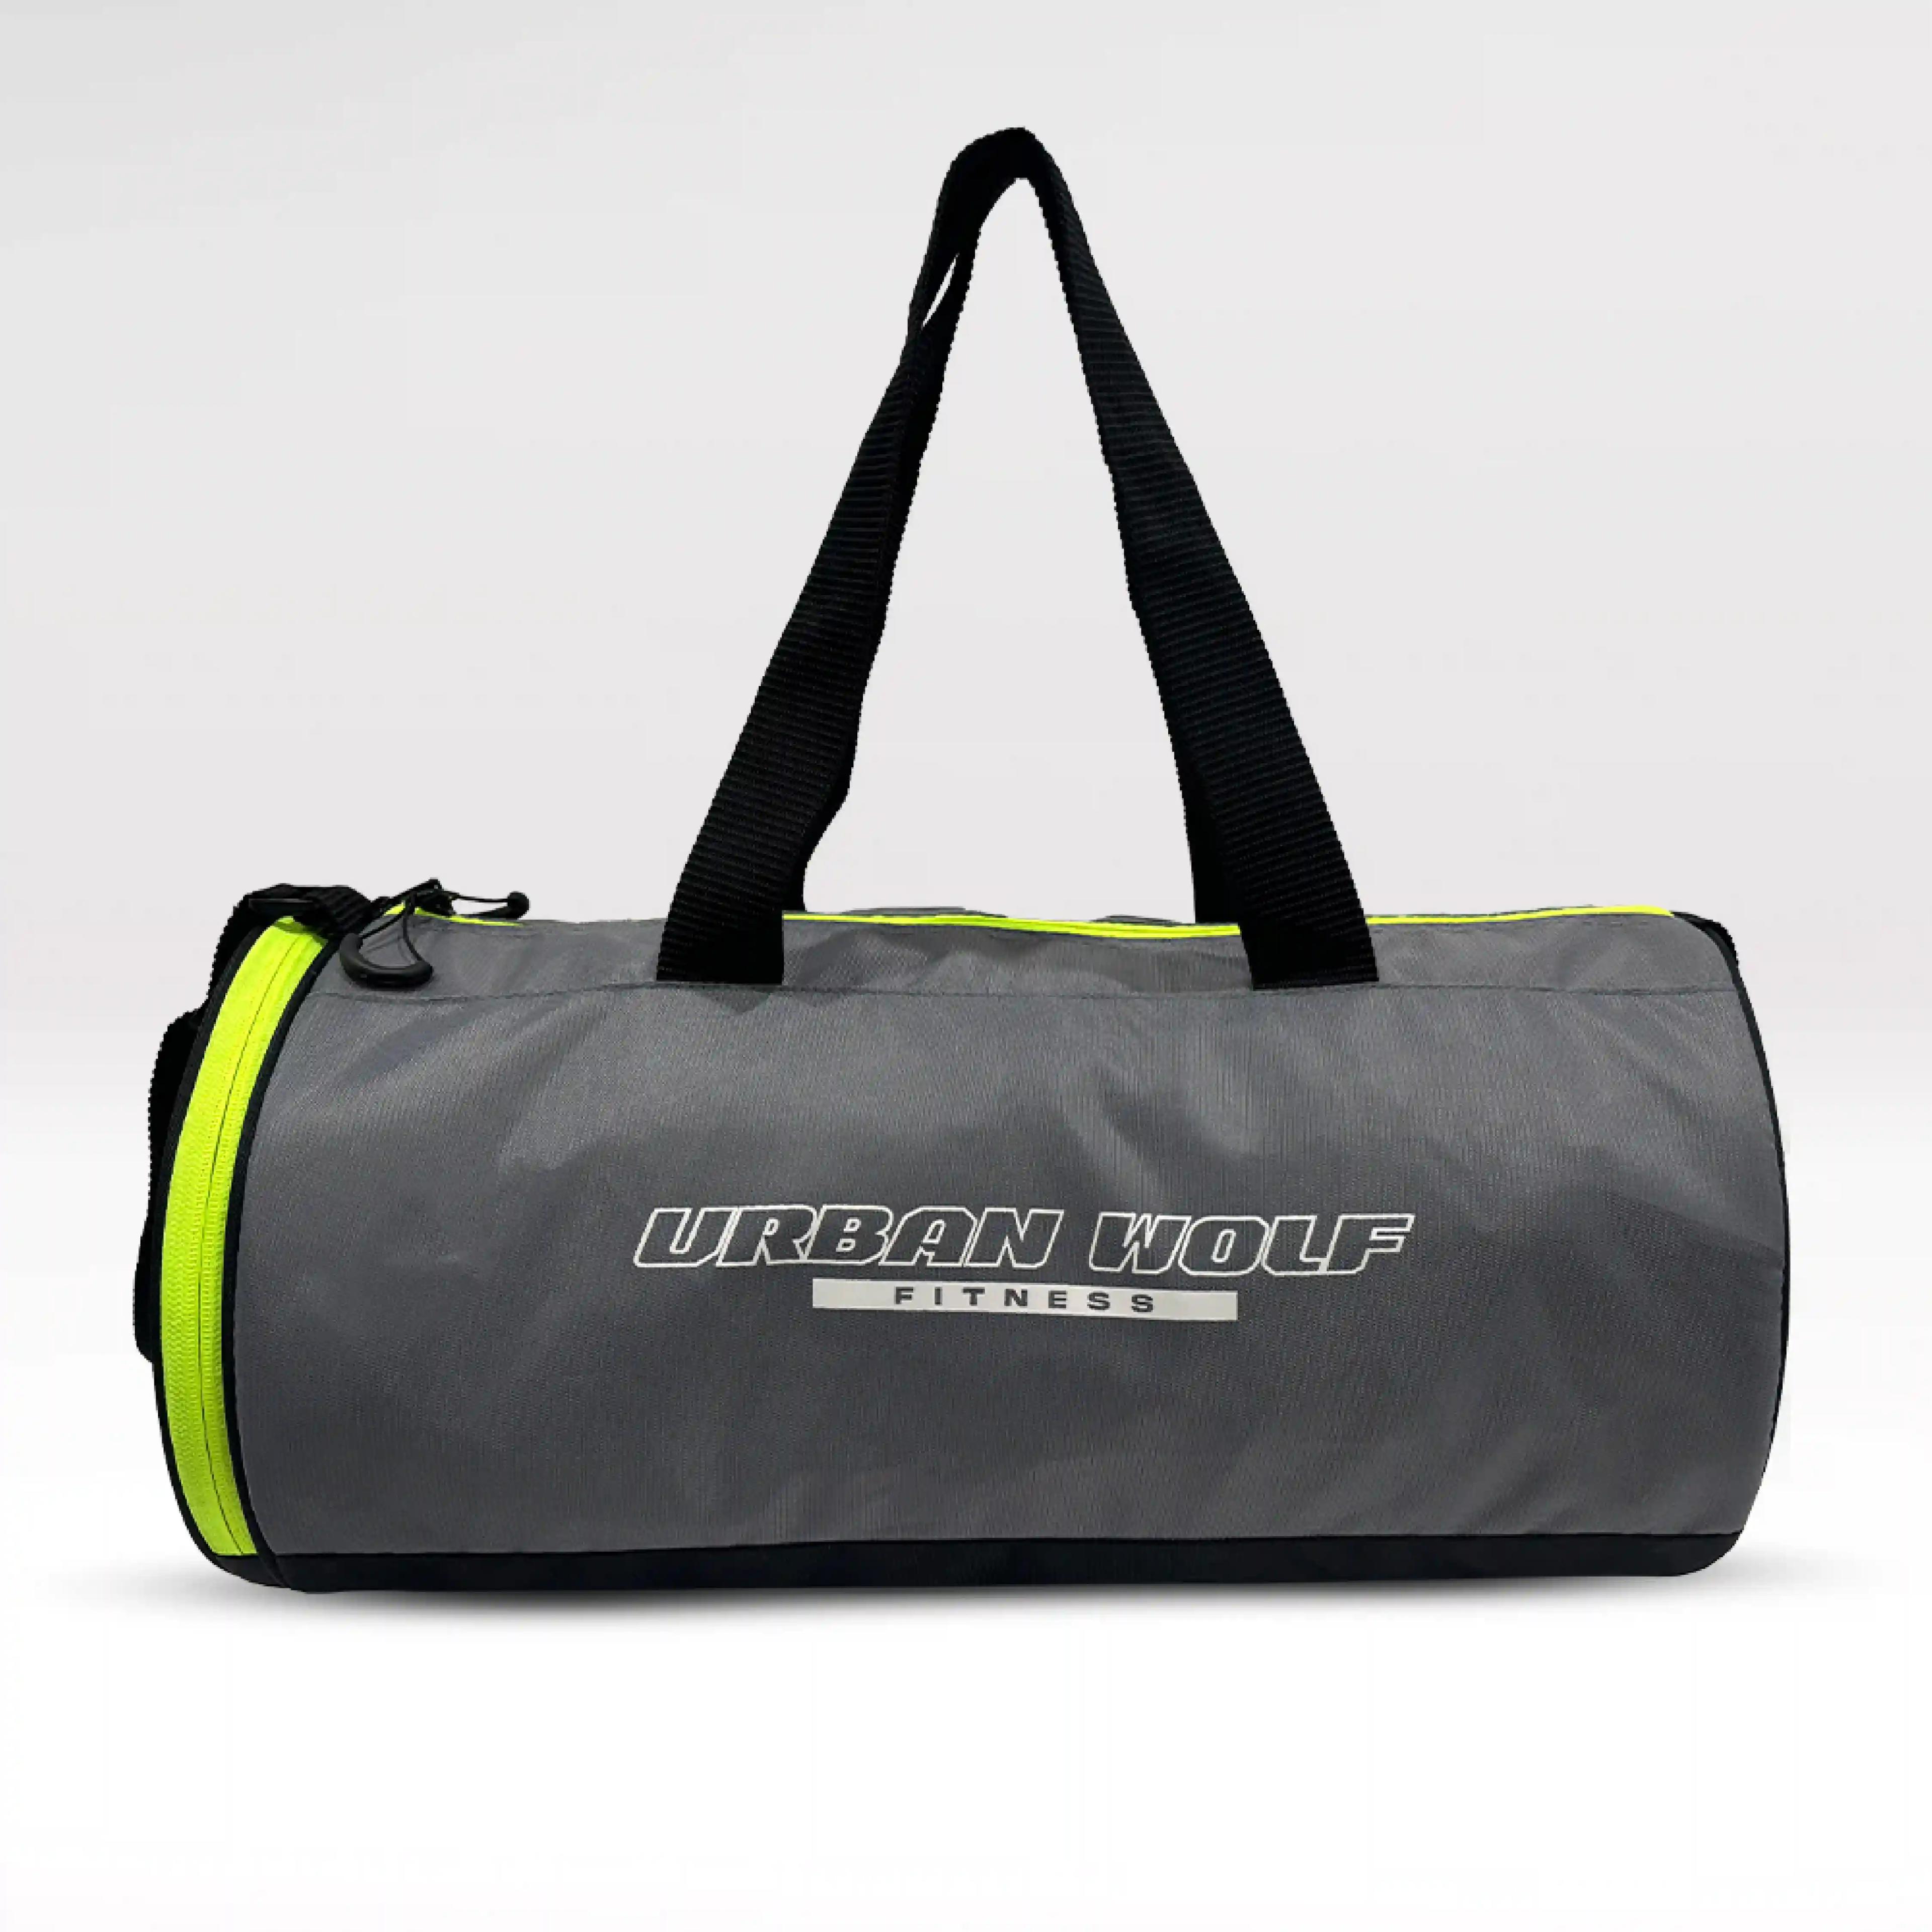 Urban Wolf 26L Gym Duffle Bag | Unisex Grey & Green Zipper | Separate Shoe Compartment | Quick Access Pocket | Durable Polyester | Multi-Functional Sports & Travel Bag | Dimensions 49x23x23 cm